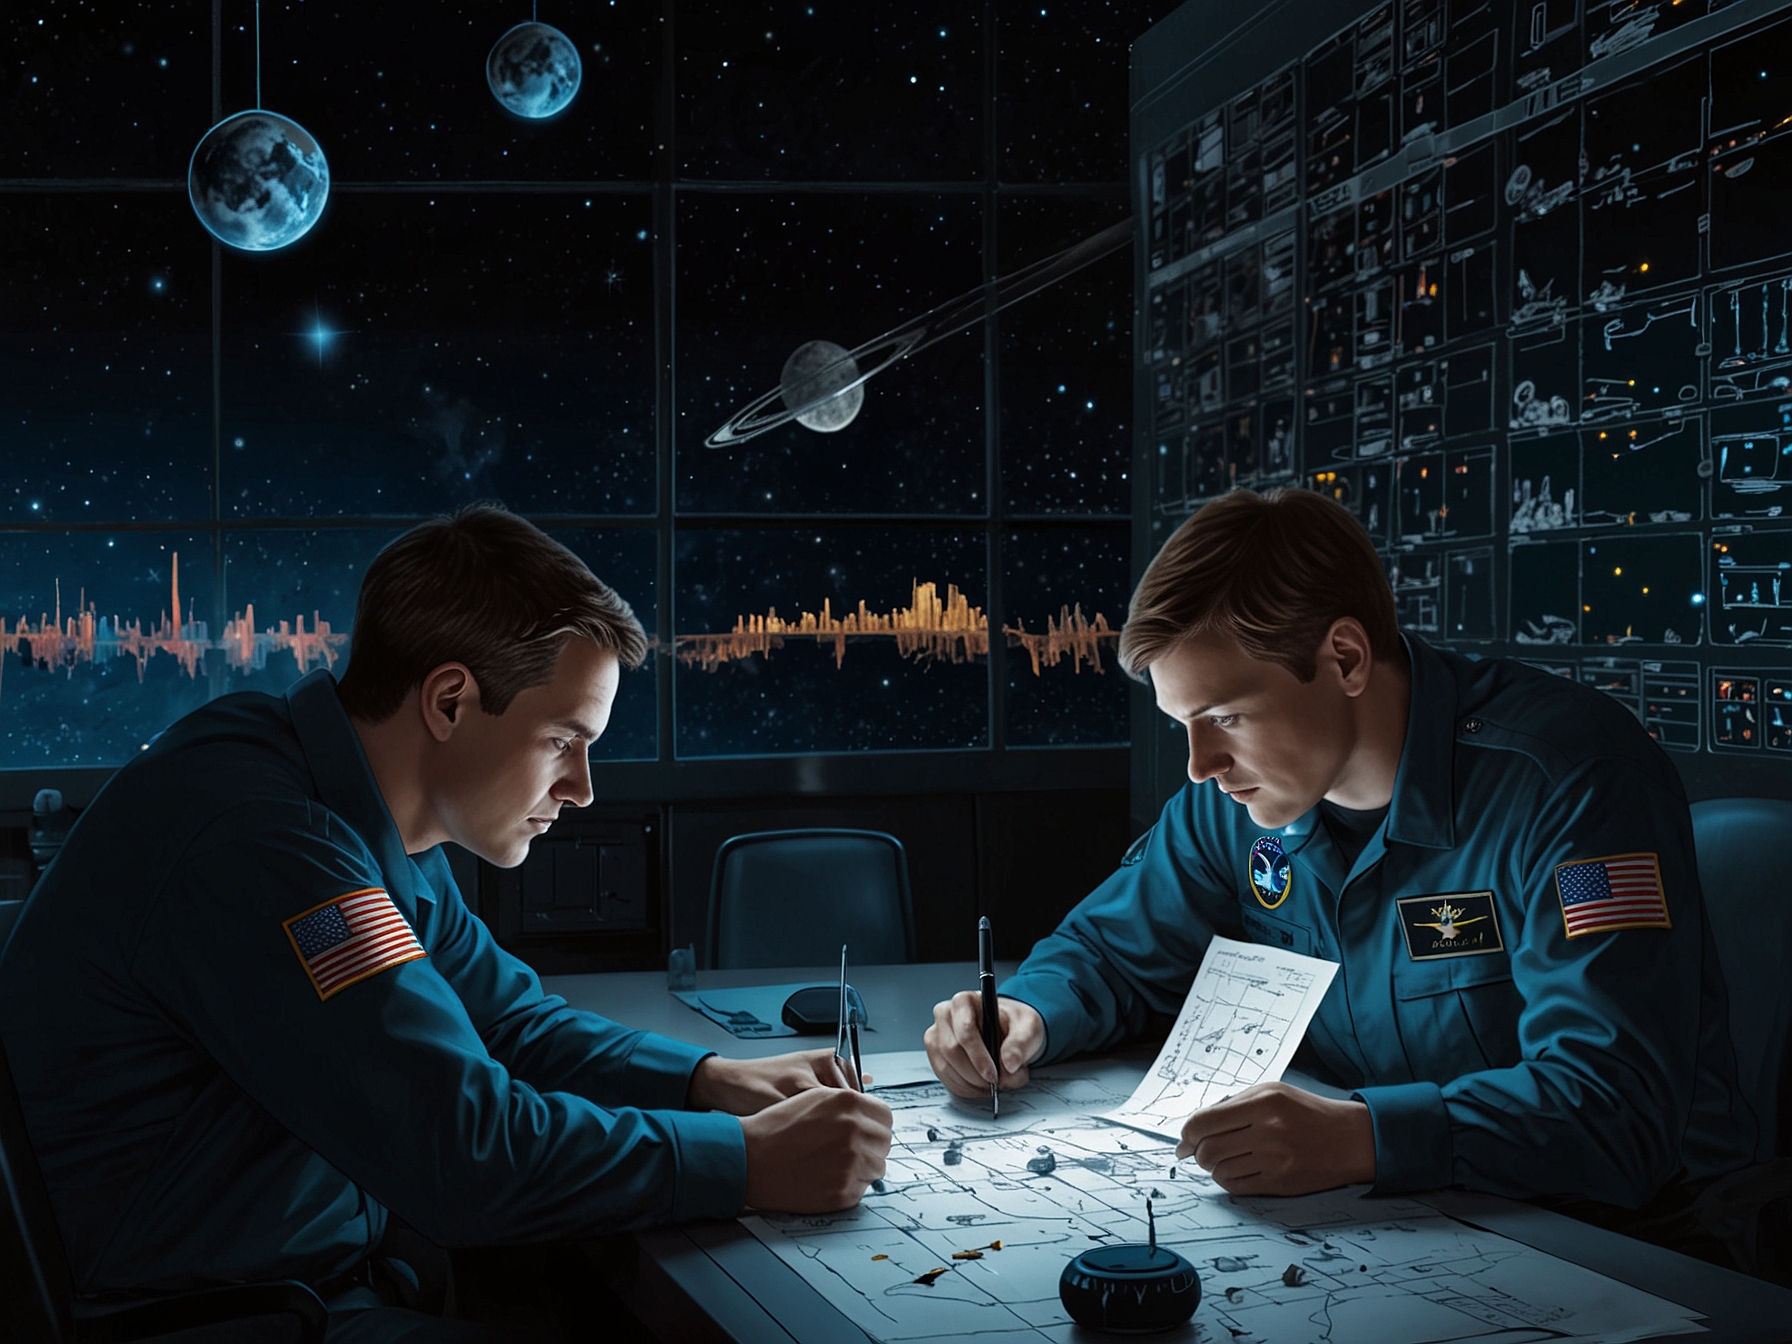 Illustration of U.S. Space Force personnel analyzing data from satellites, highlighting the ongoing necessity of space operations despite budgetary cuts.